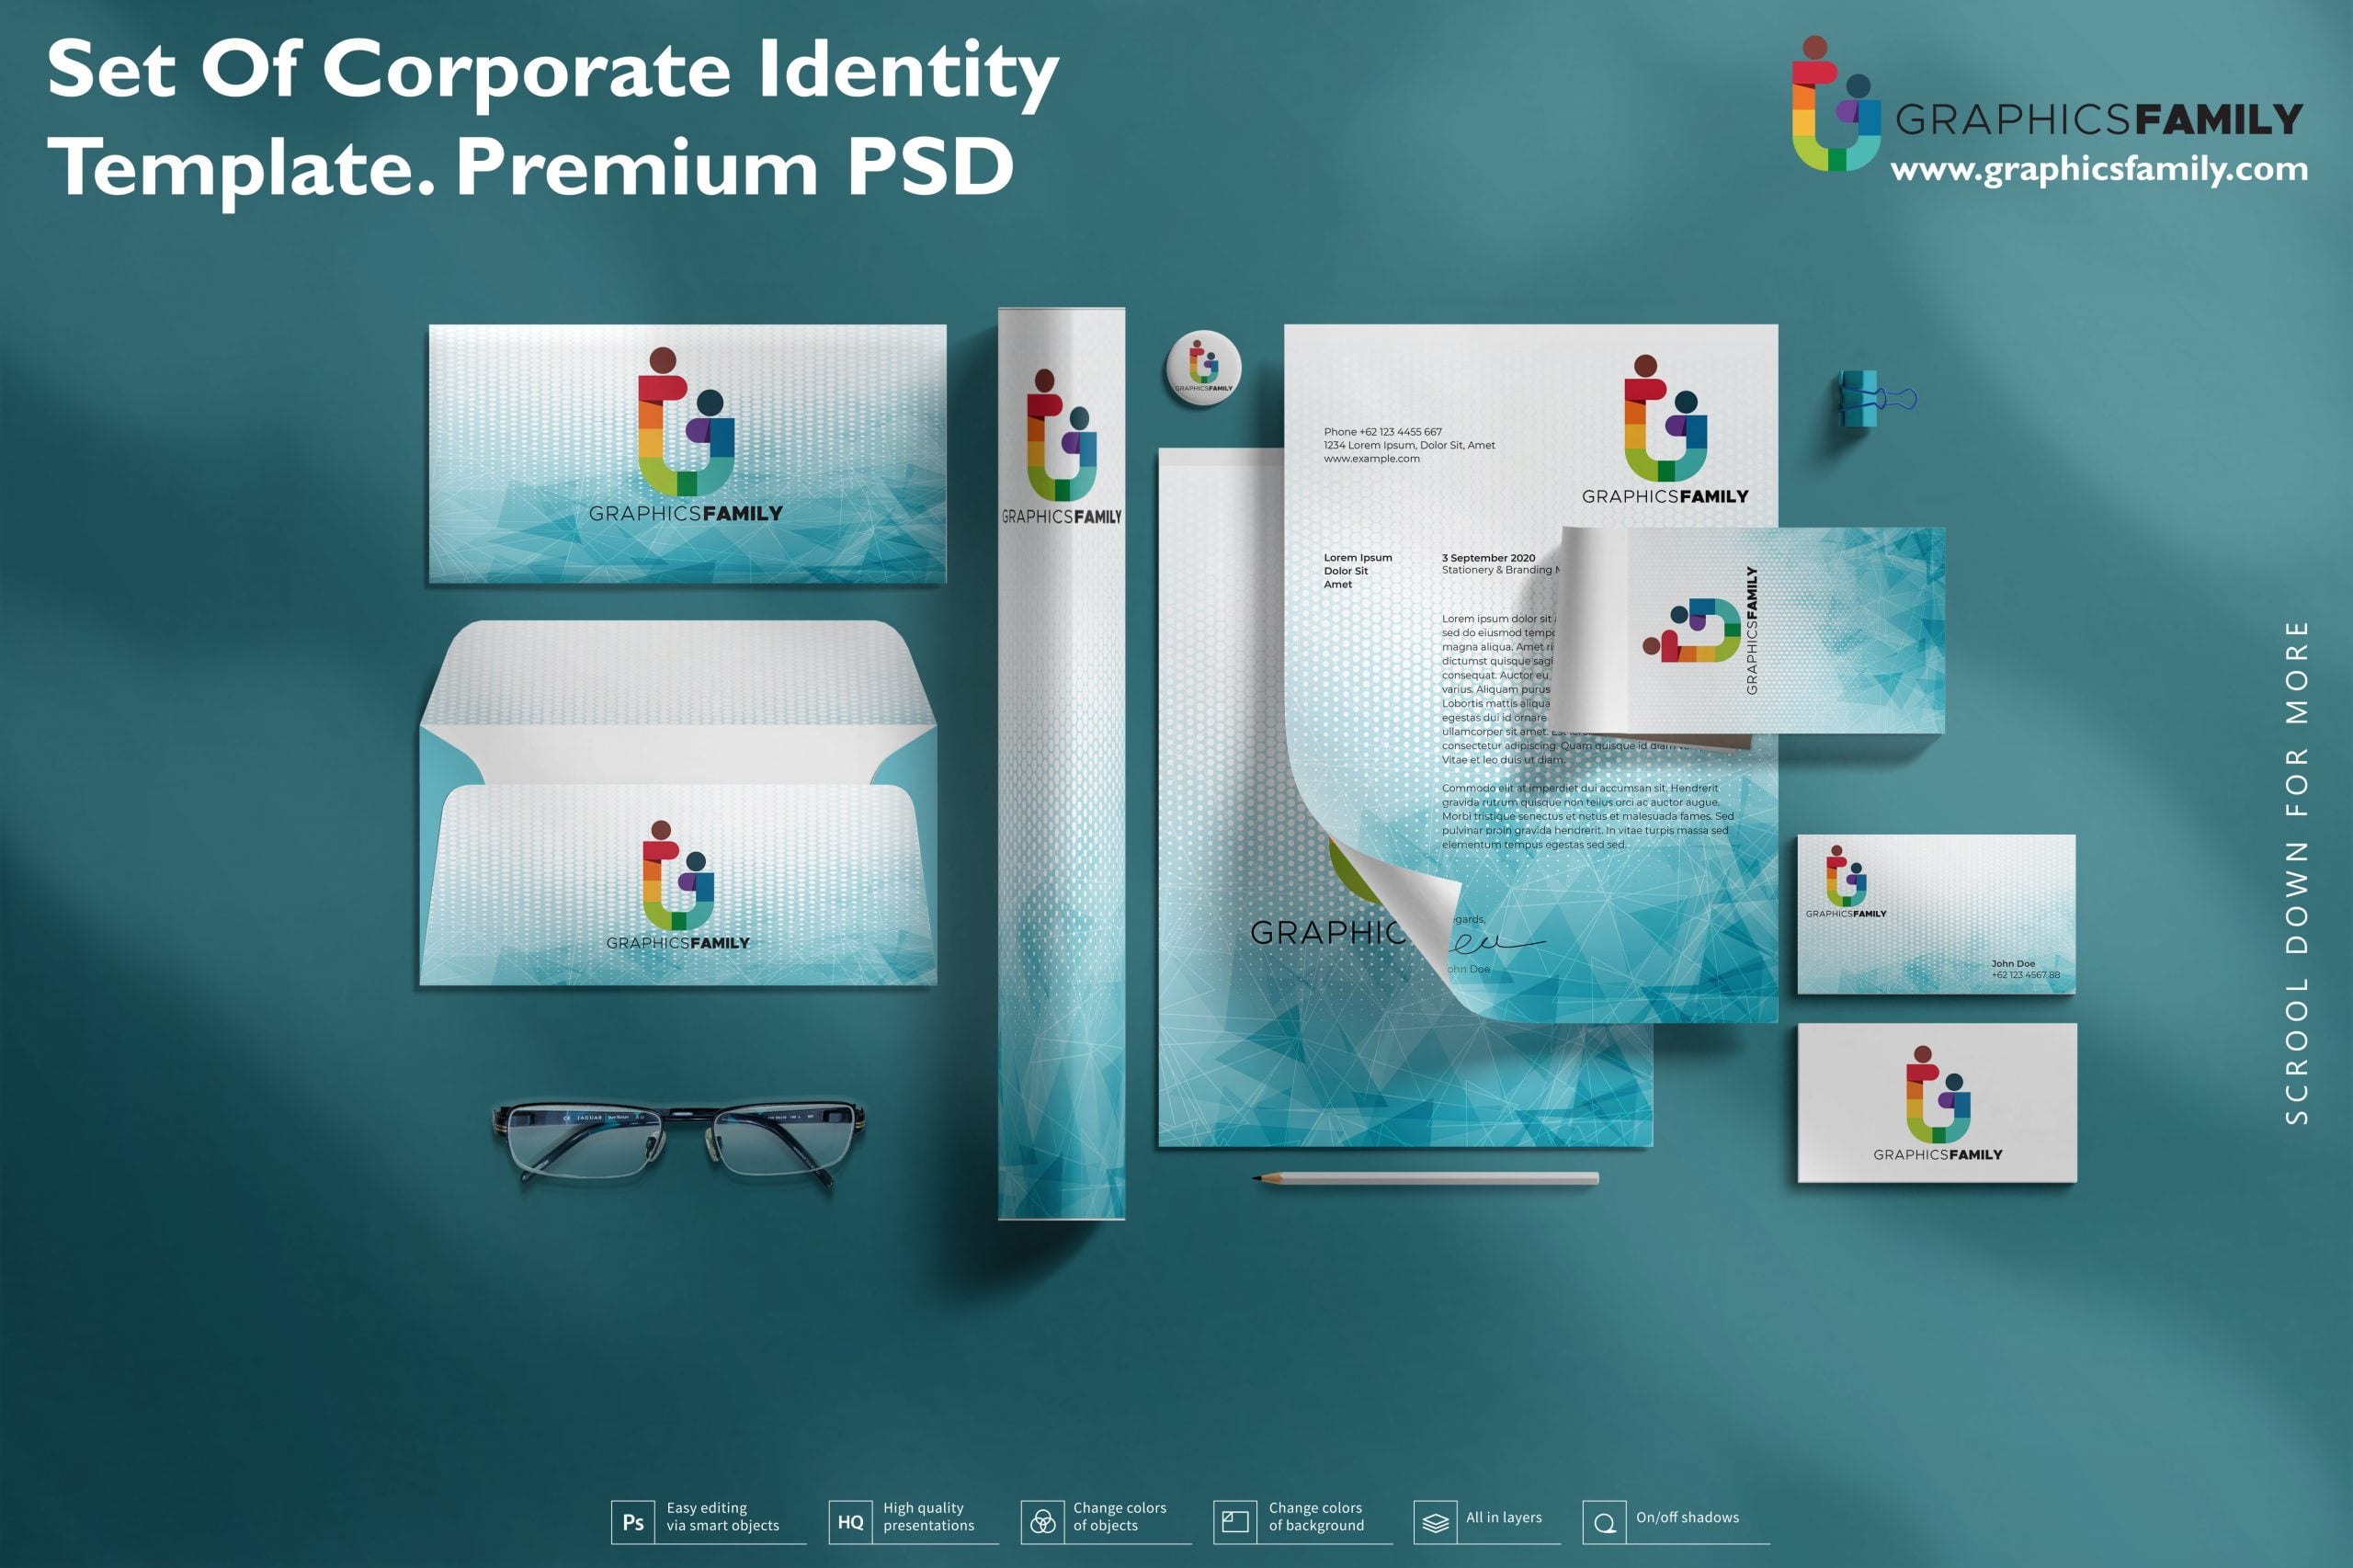 Set of Corporate Identity Template Premium Quality PSD – GraphicsFamily